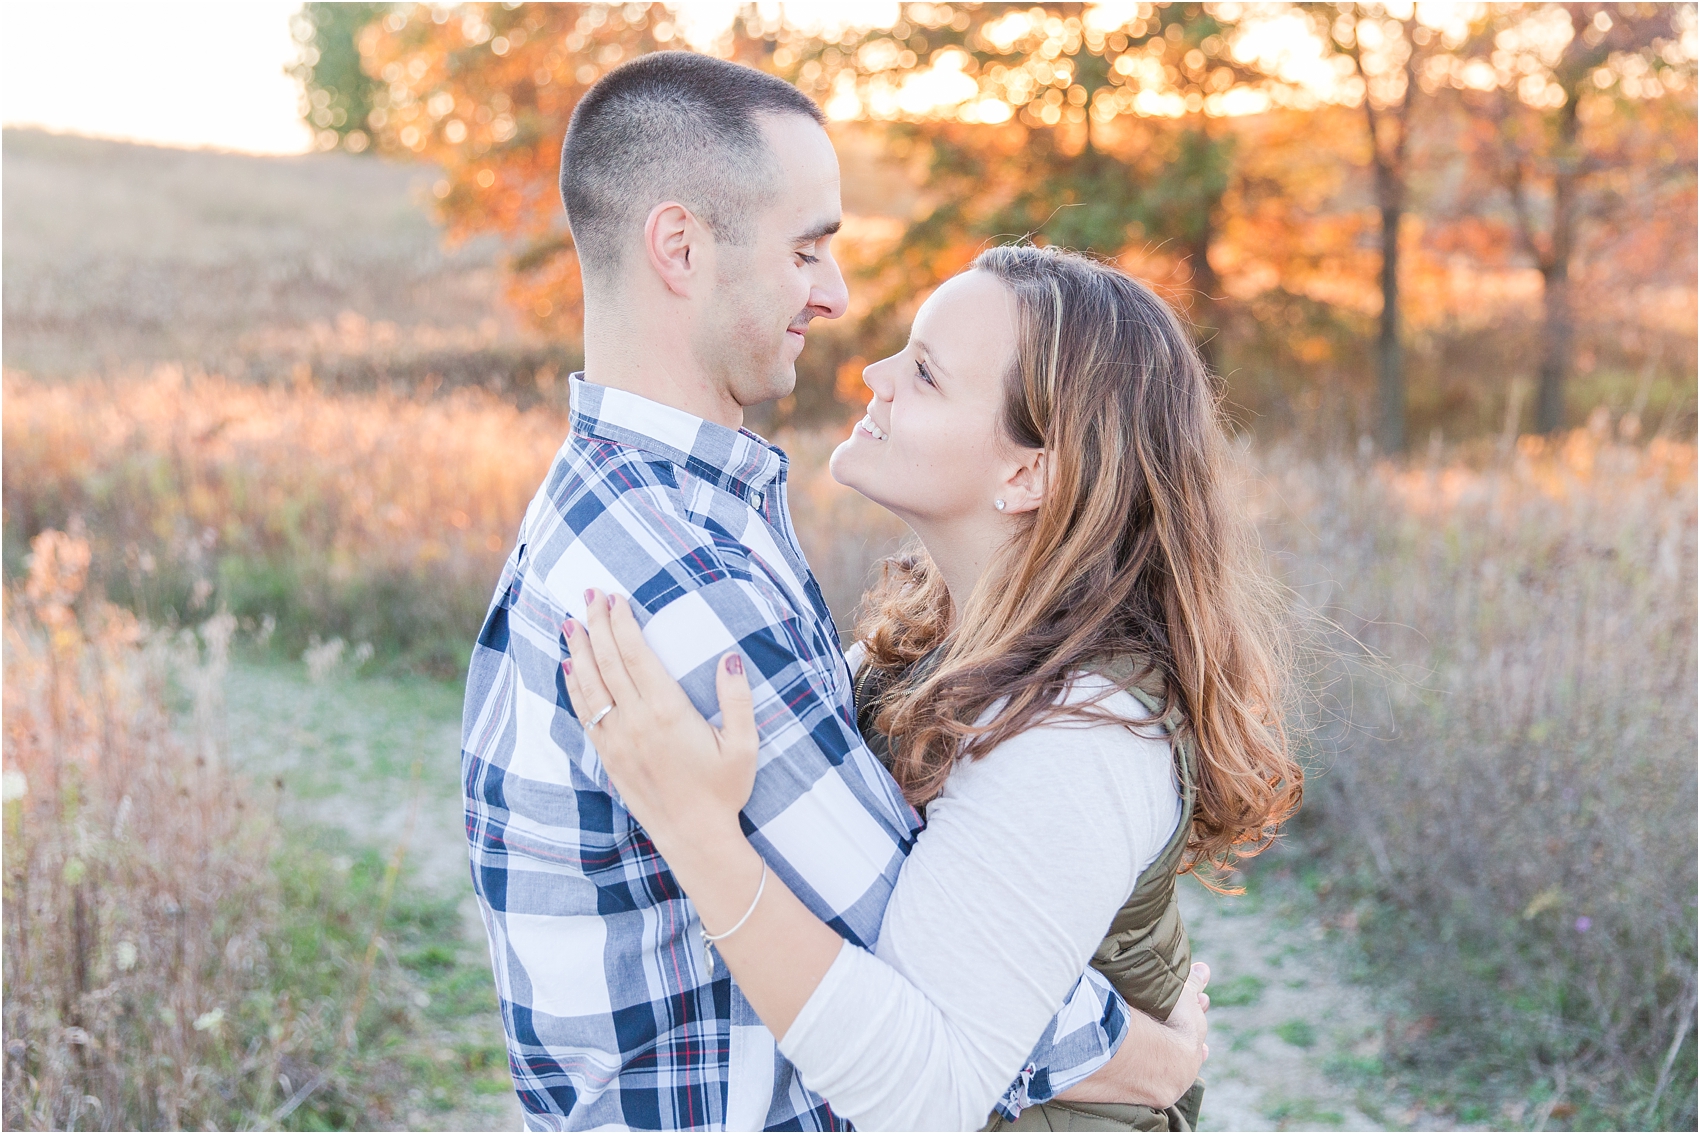 romantic-fall-engagement-photos-at-indian-springs-metropark-in-clarkston-mi-by-courtney-carolyn-photography_0011.jpg